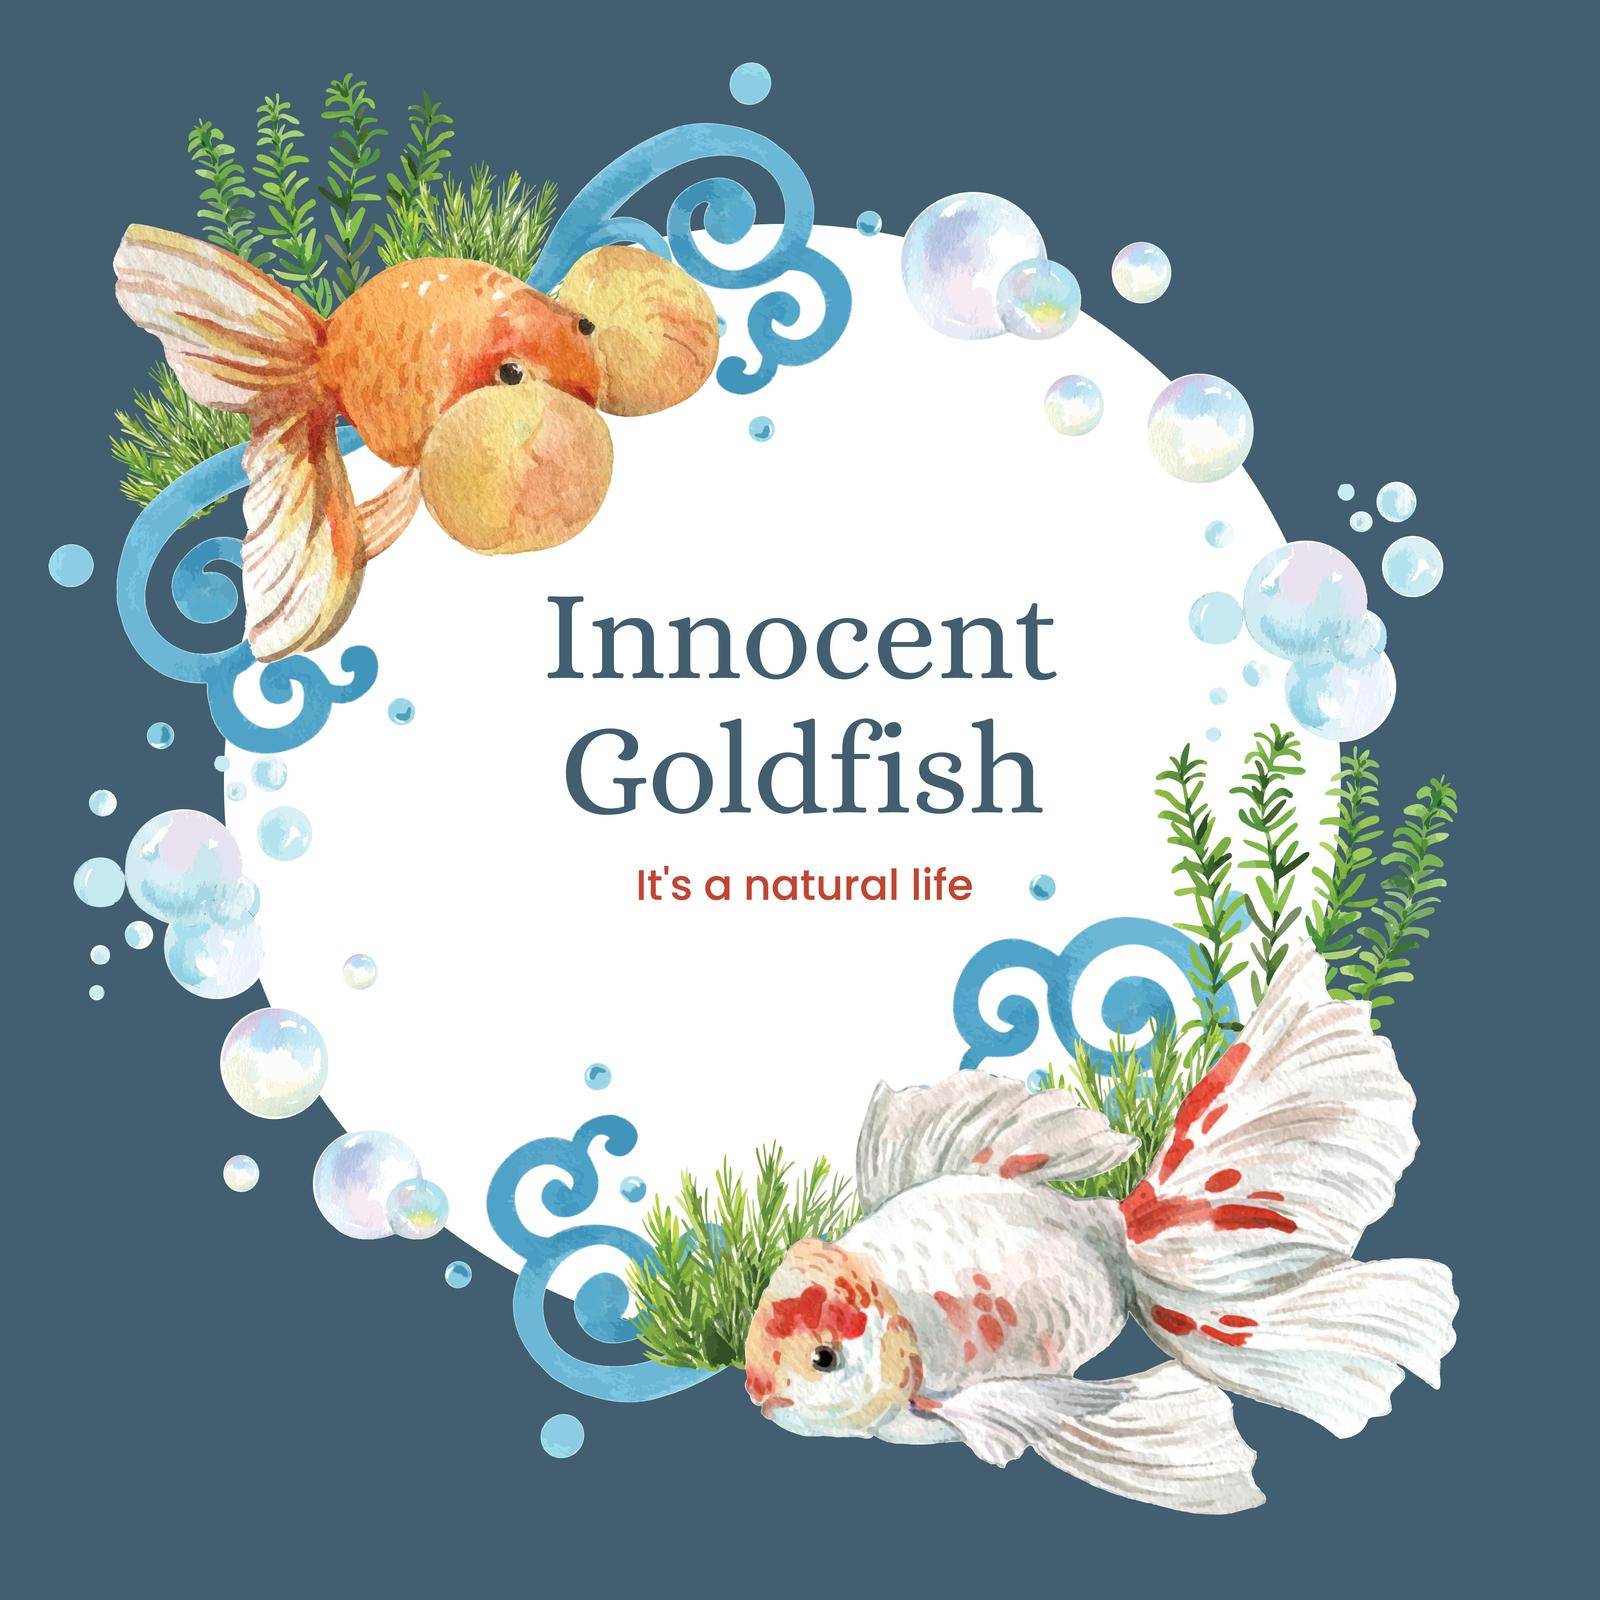 Wreath template with gold fish concept,watercolor style. by Photographeeasia